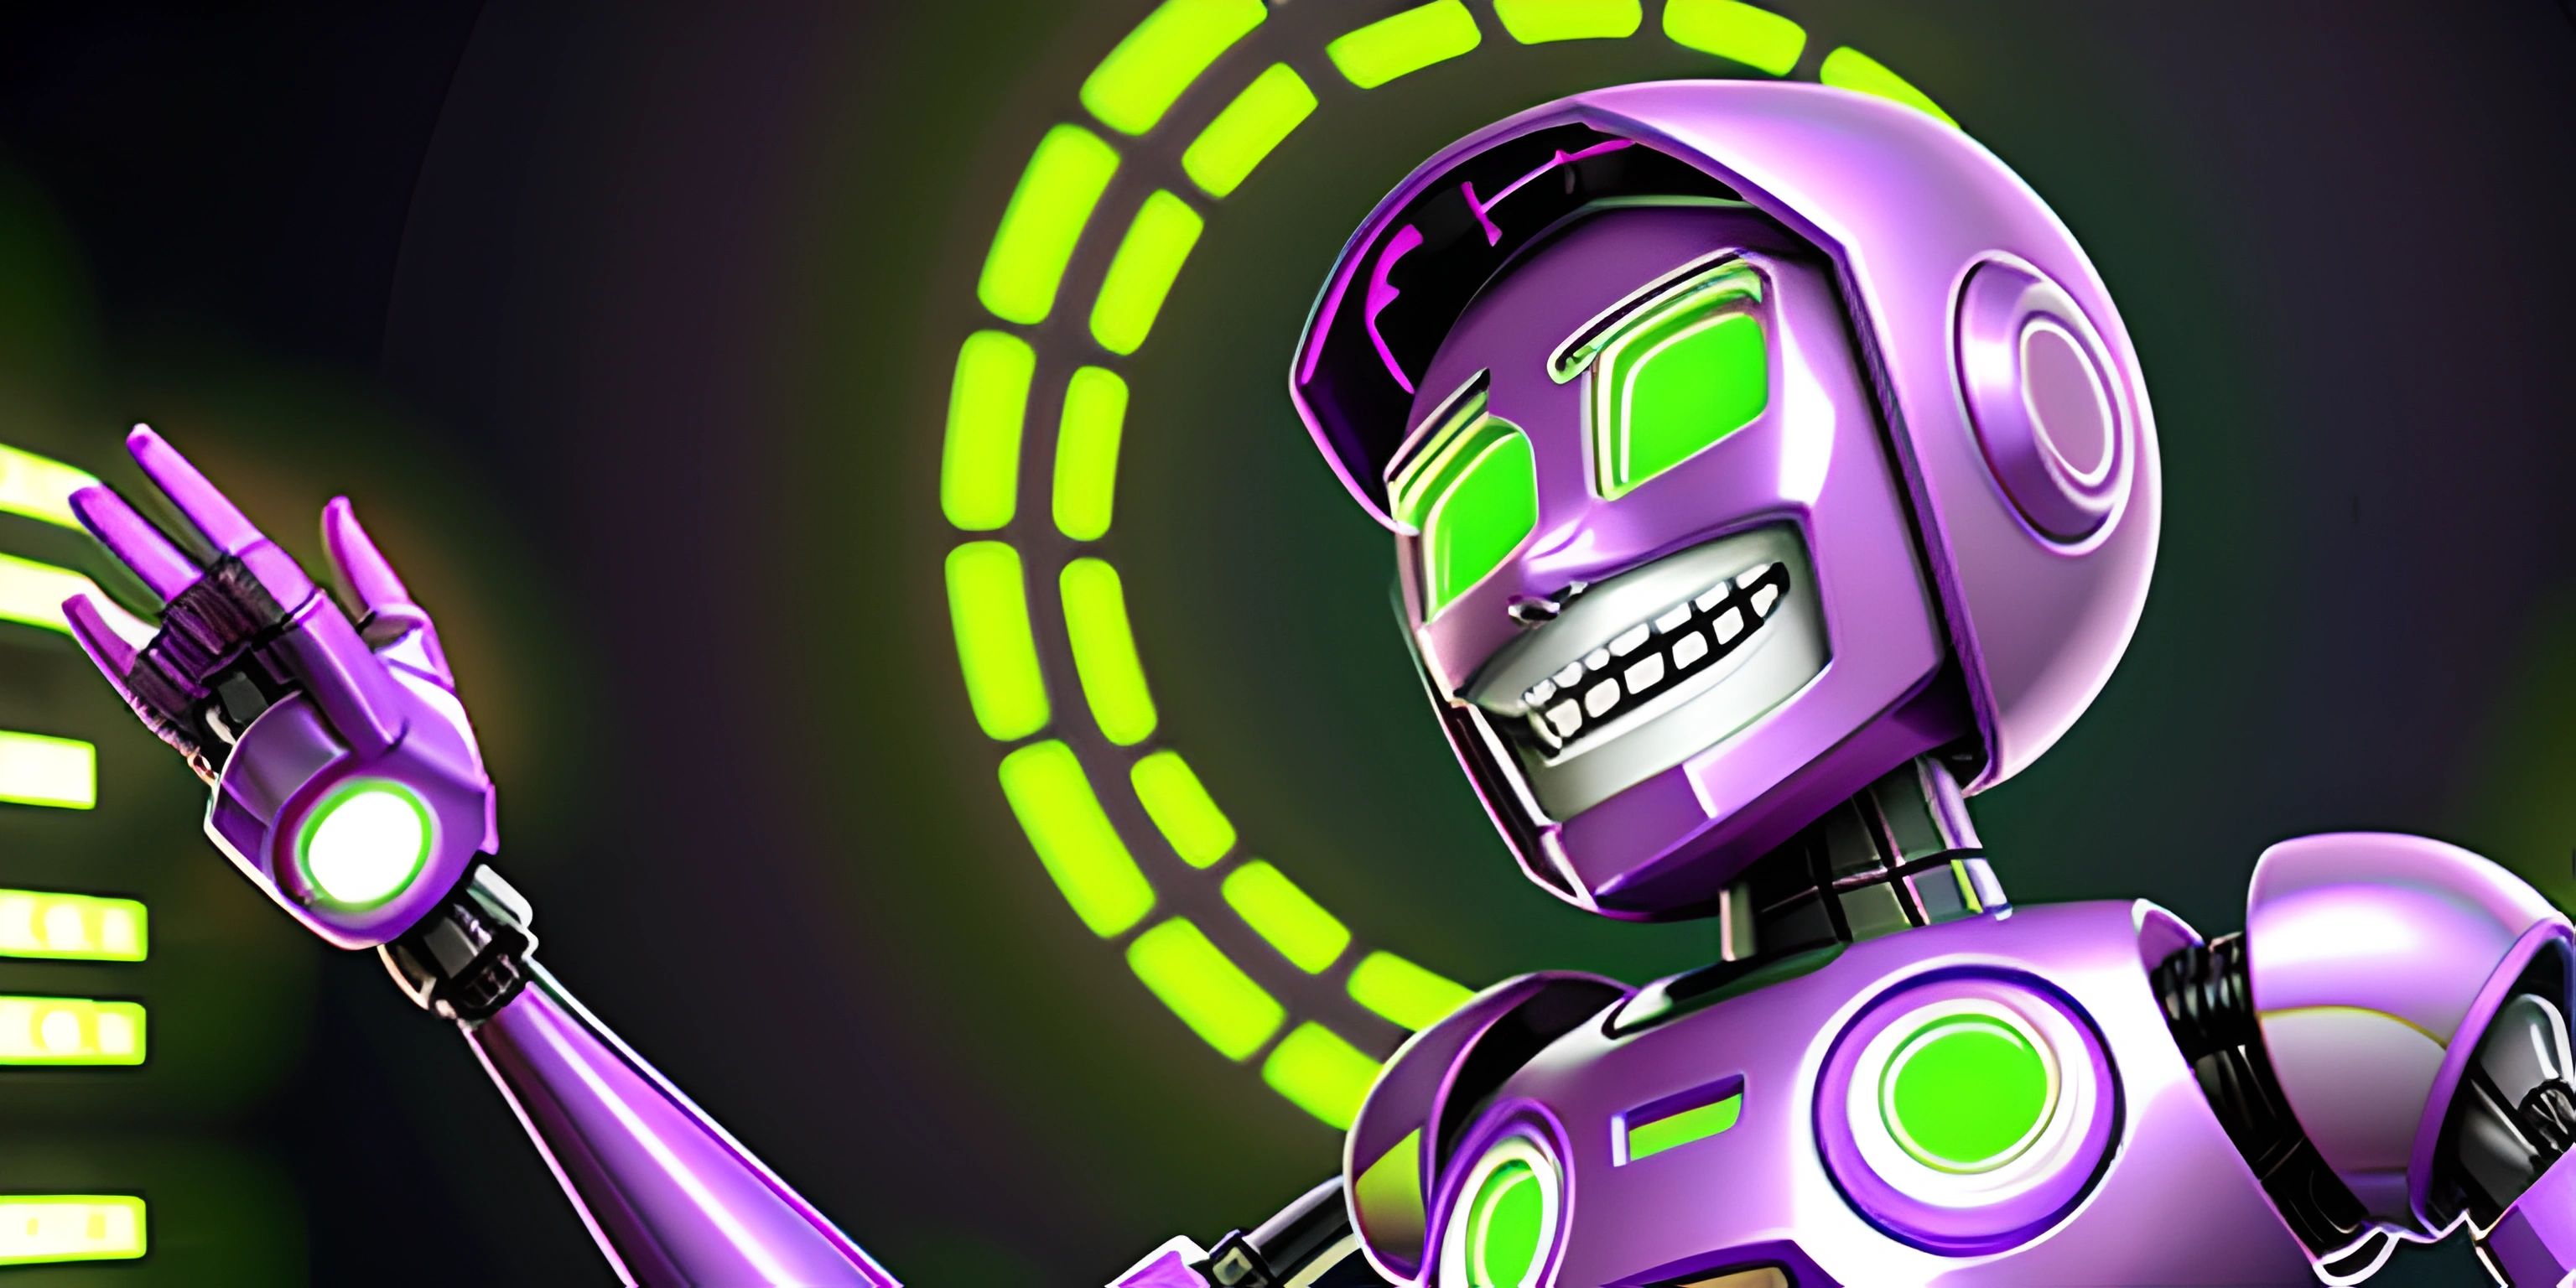 a robot with a green led hand up in front of a clock and neons